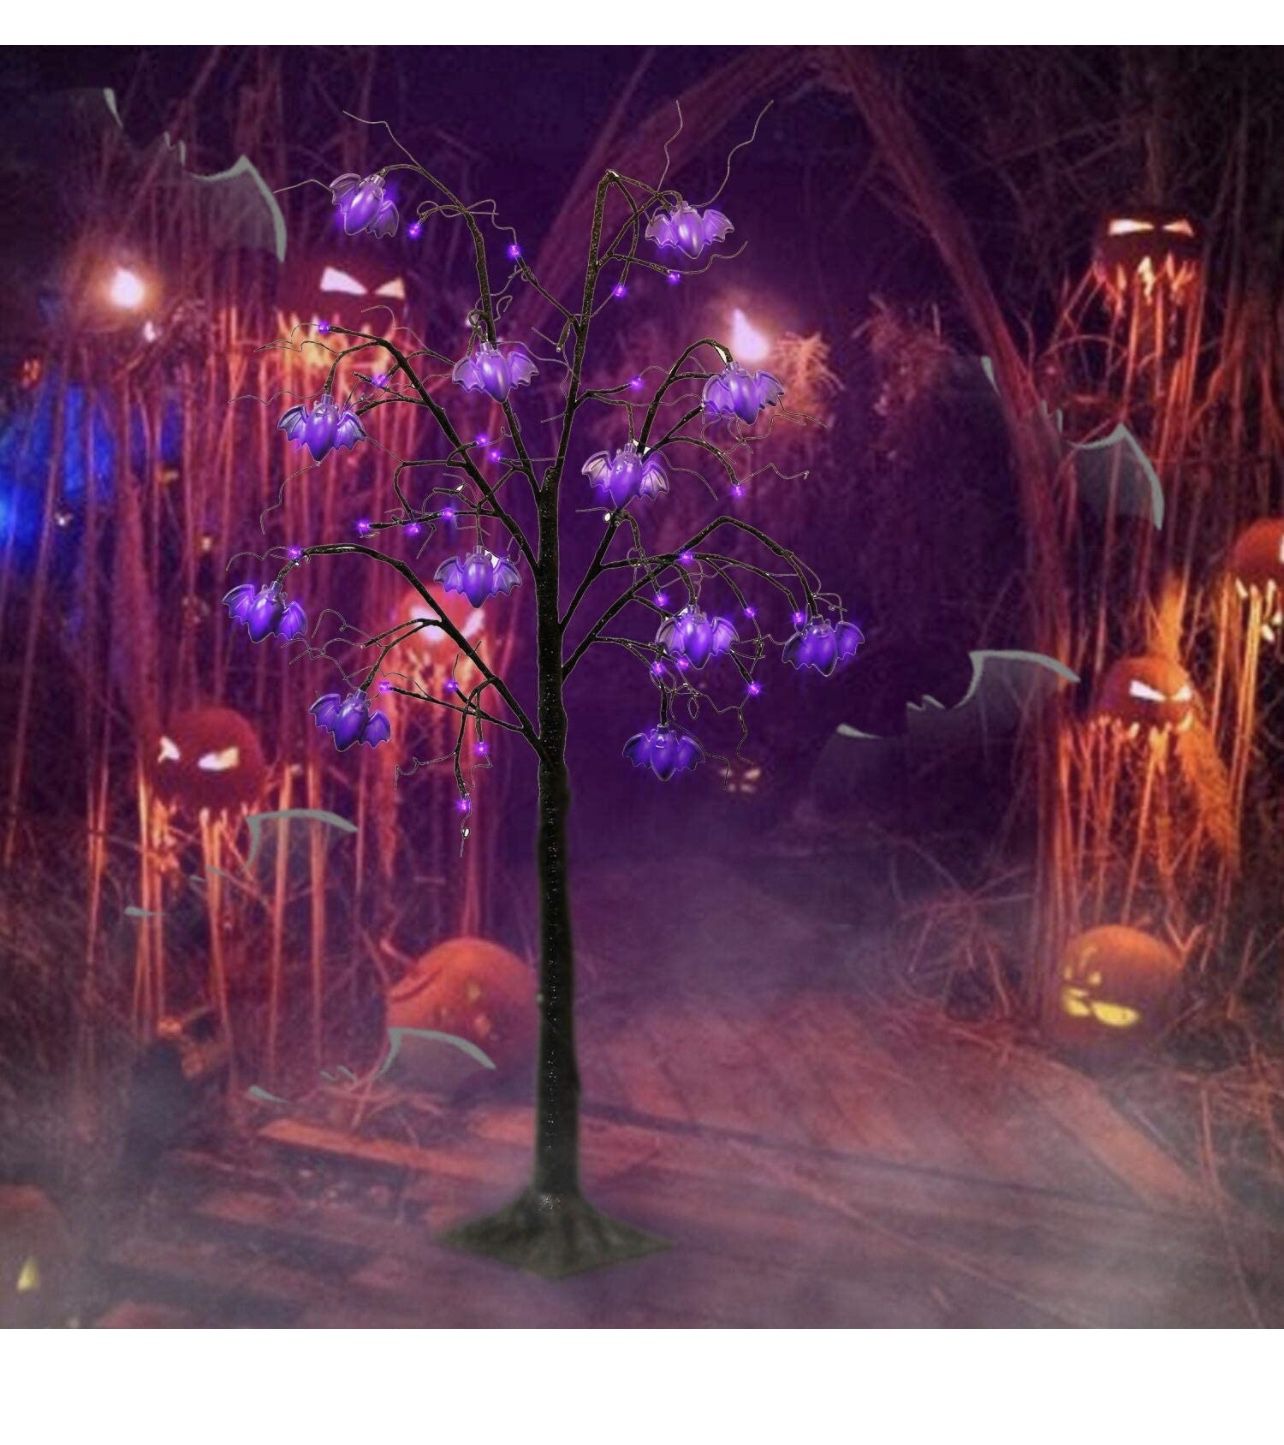 Twinkle Star Halloween Tree, 4FT Halloween Decoration Black Spooky Tree Glittered with 48 LED Purple Lights and 12 Bats, 24V 3.6W Low Voltage Artifici